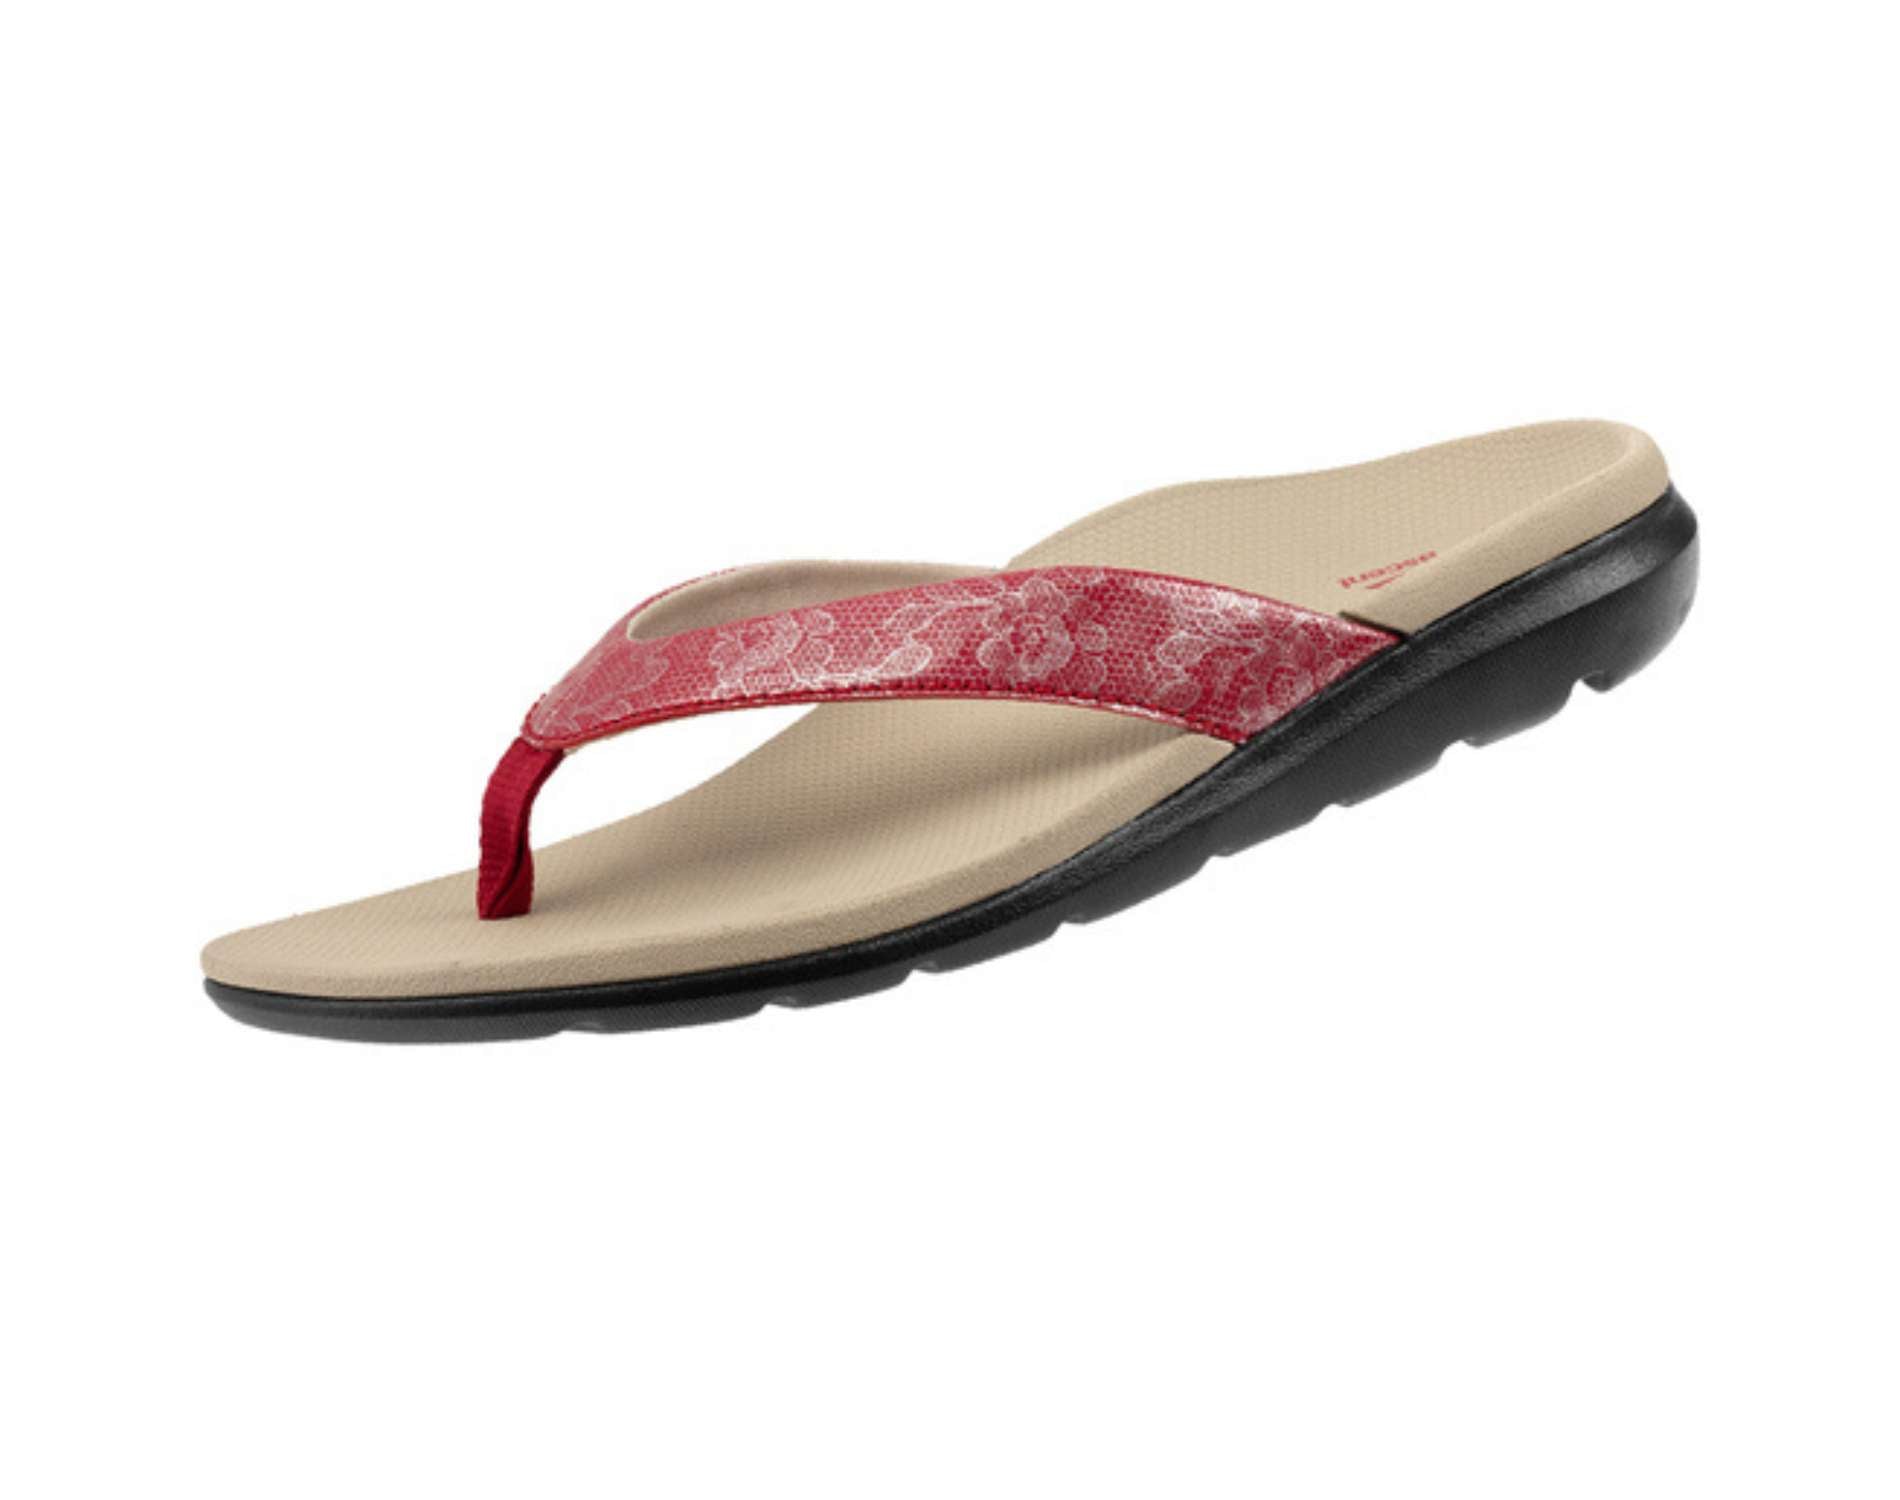 Ascent's Groove sandals for women in red tan colour